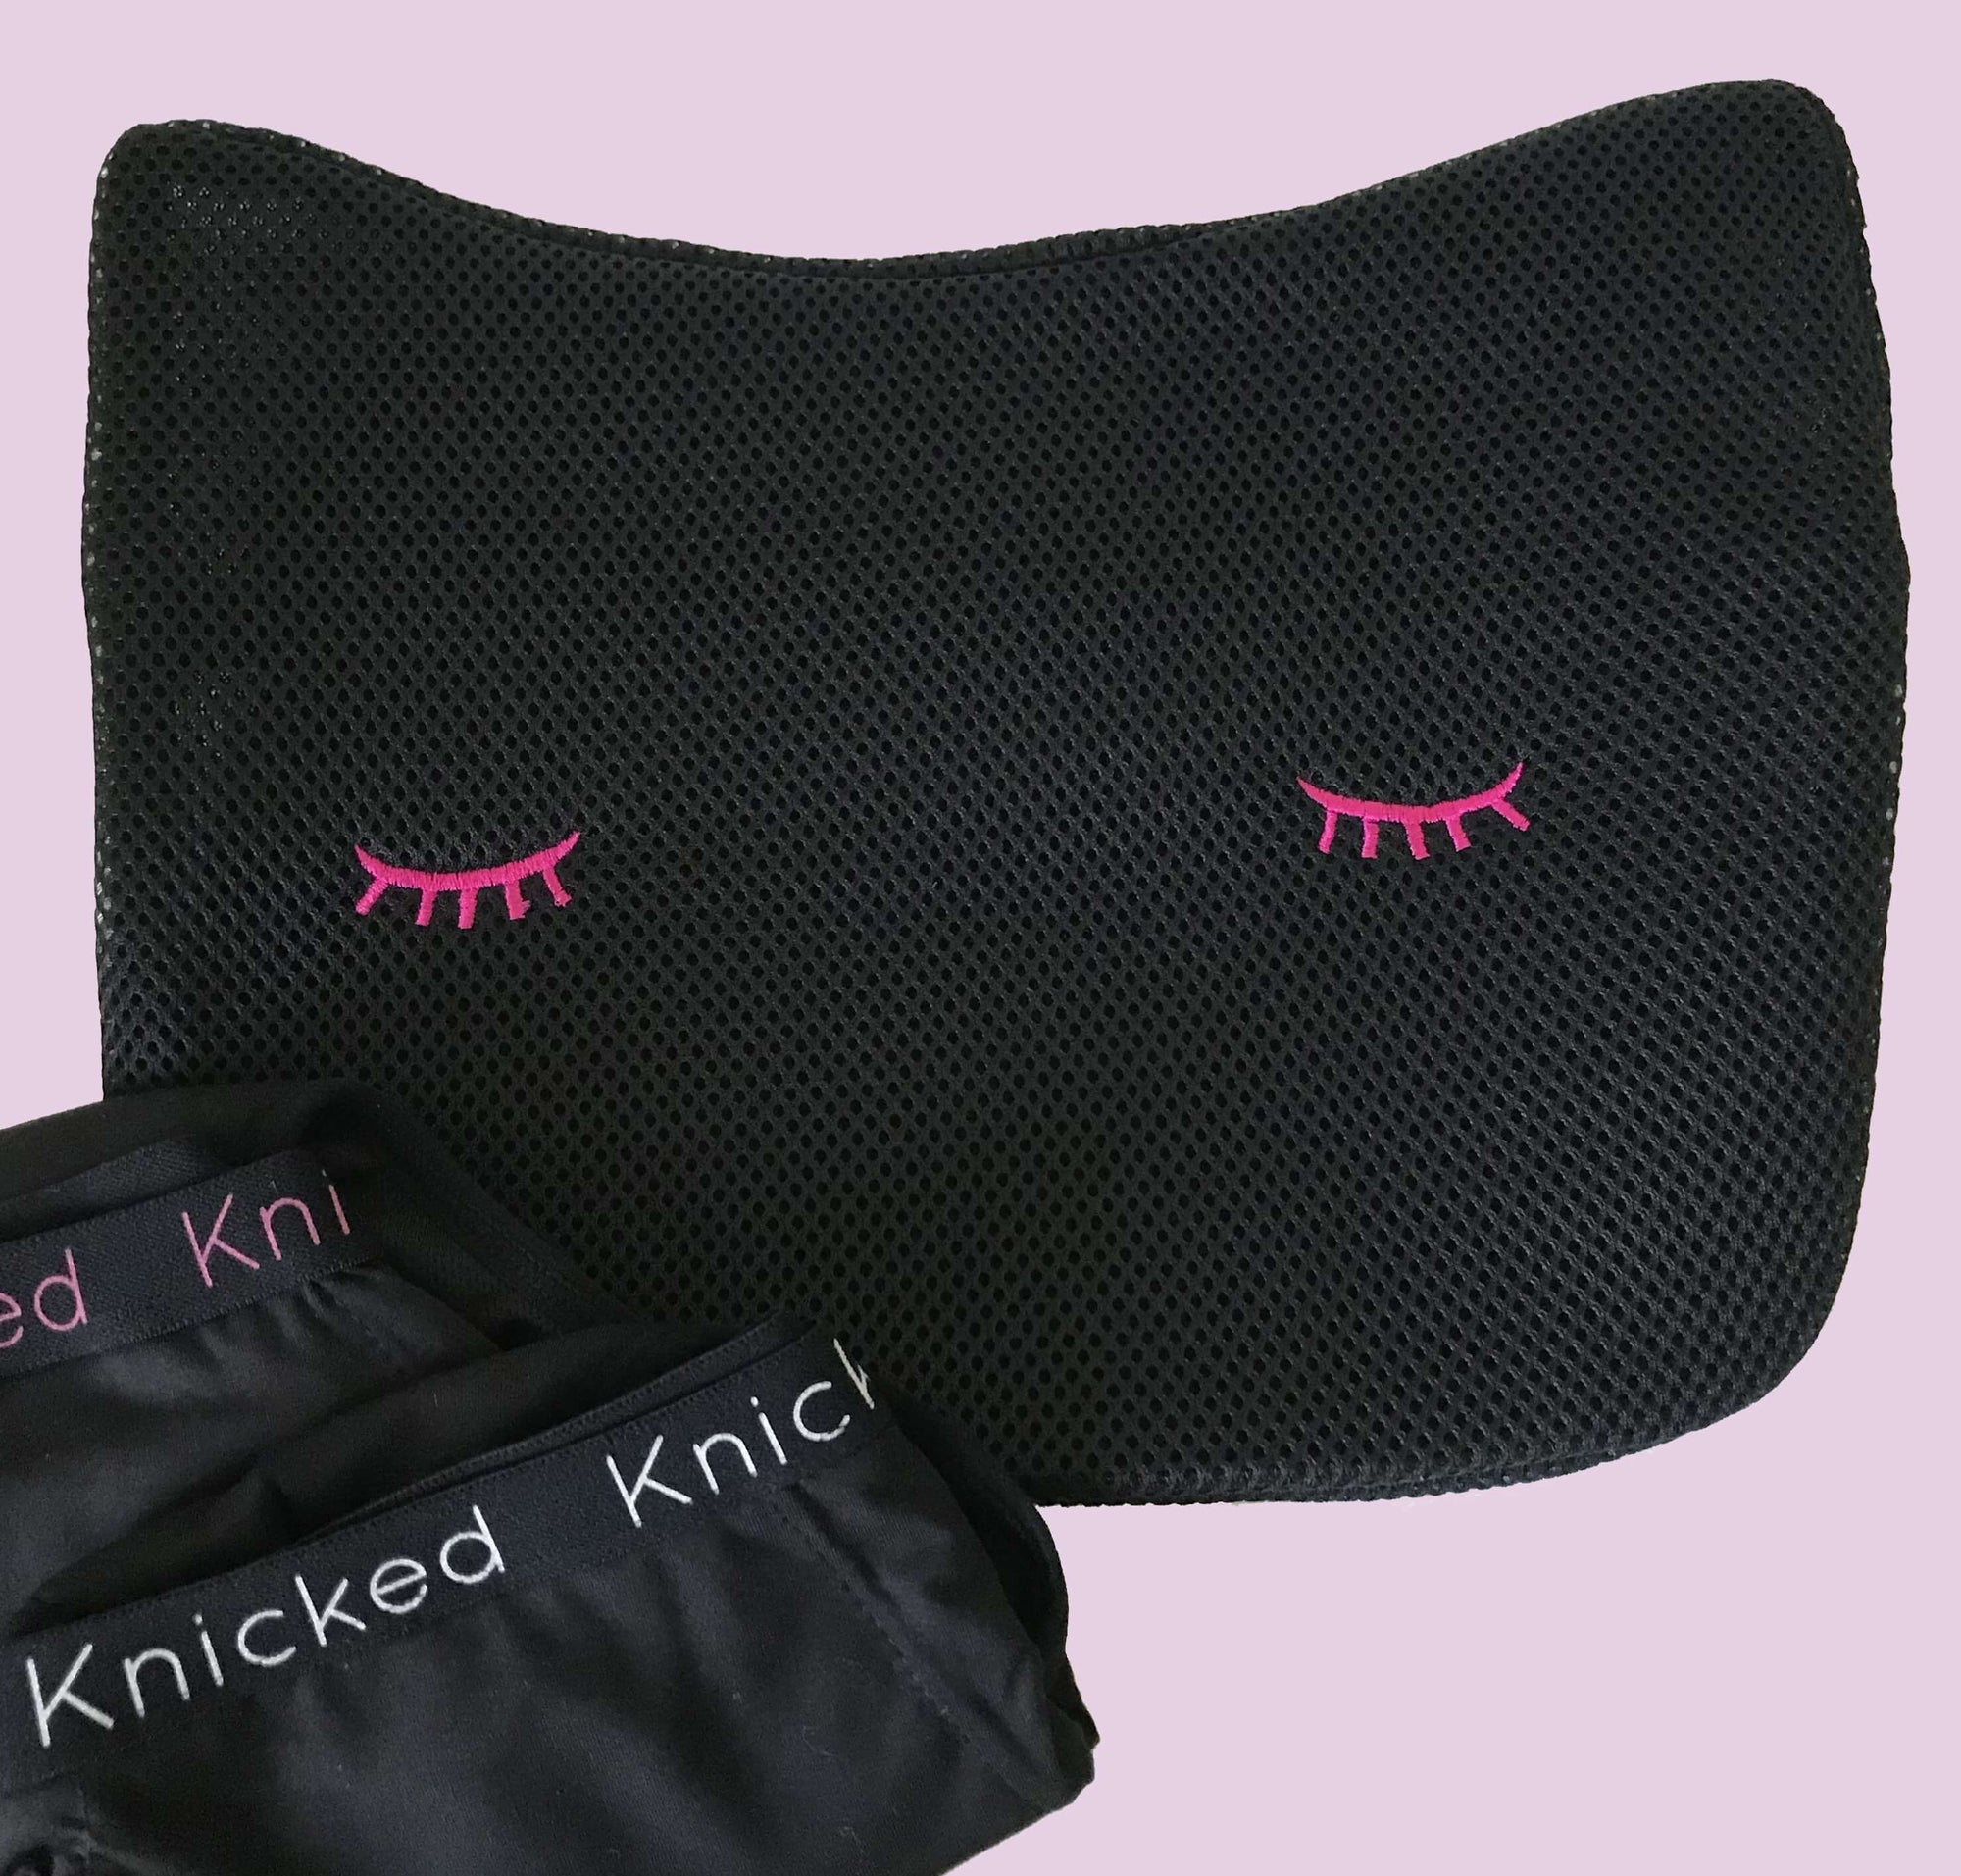 Knicked undergarment wash bag, holds up to 5 pairs of undies.